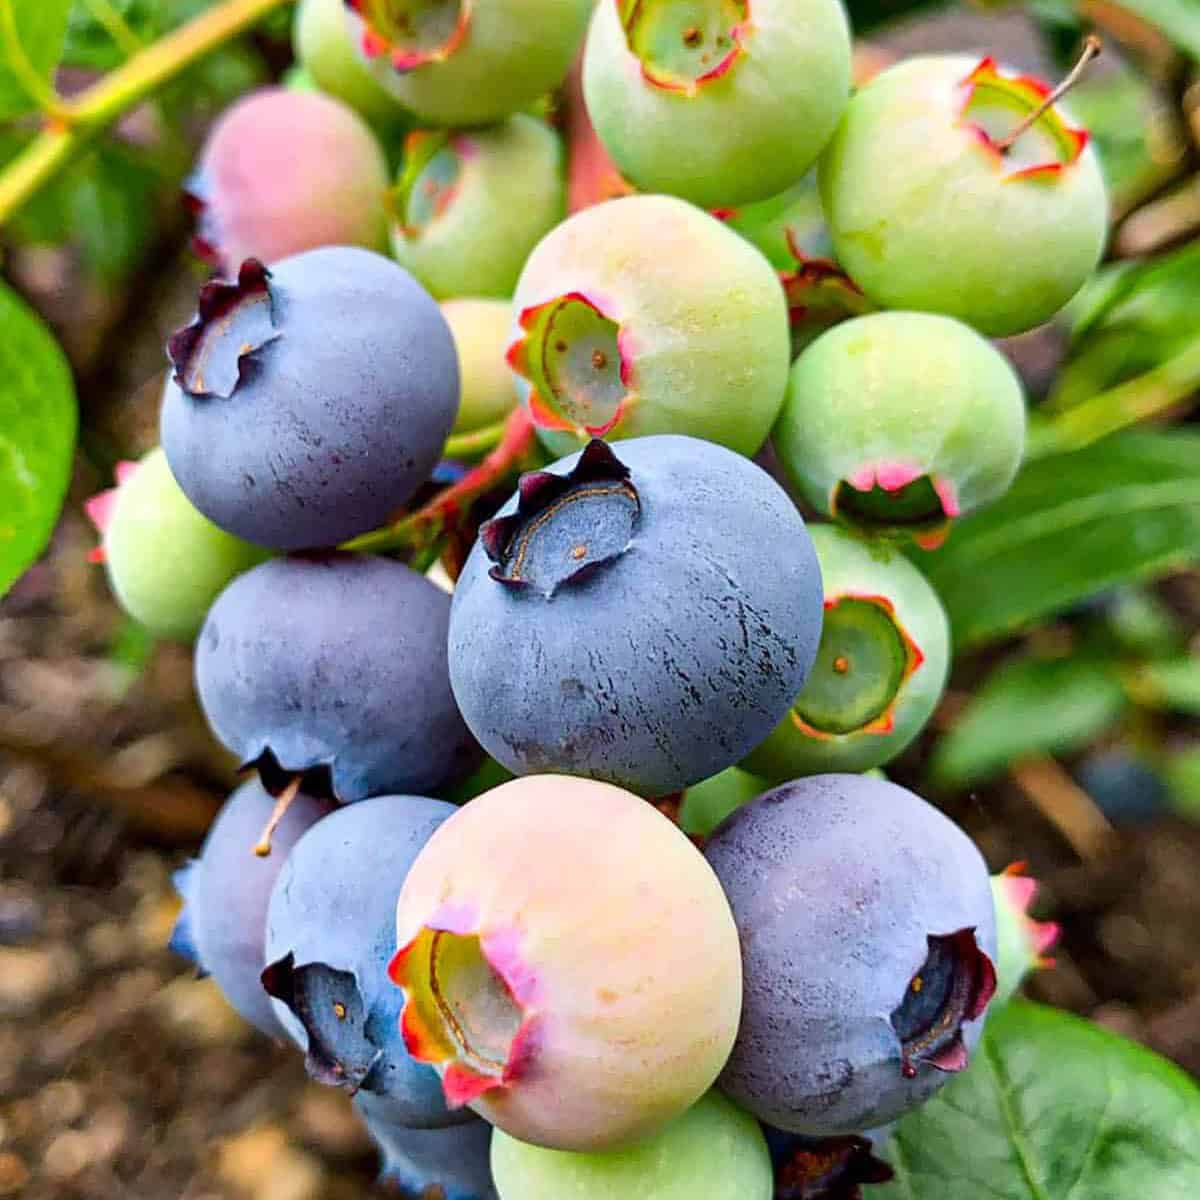 Cluster of blueberries with blue, green and pink berries.